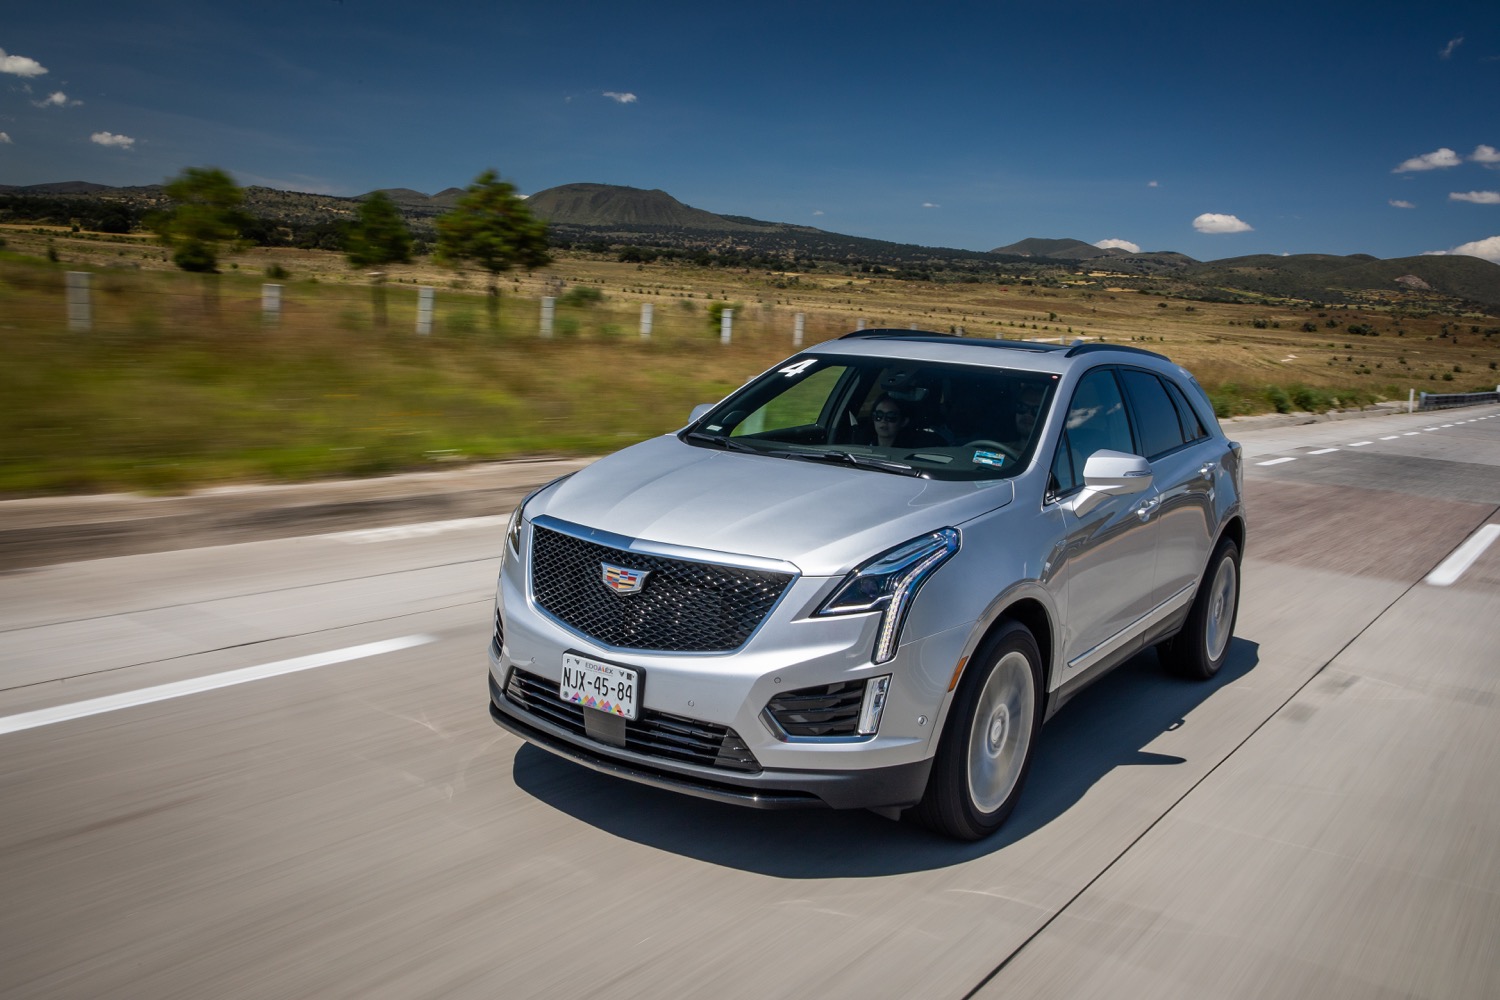 2023 Cadillac XT5 Details Come To Light: Exclusive